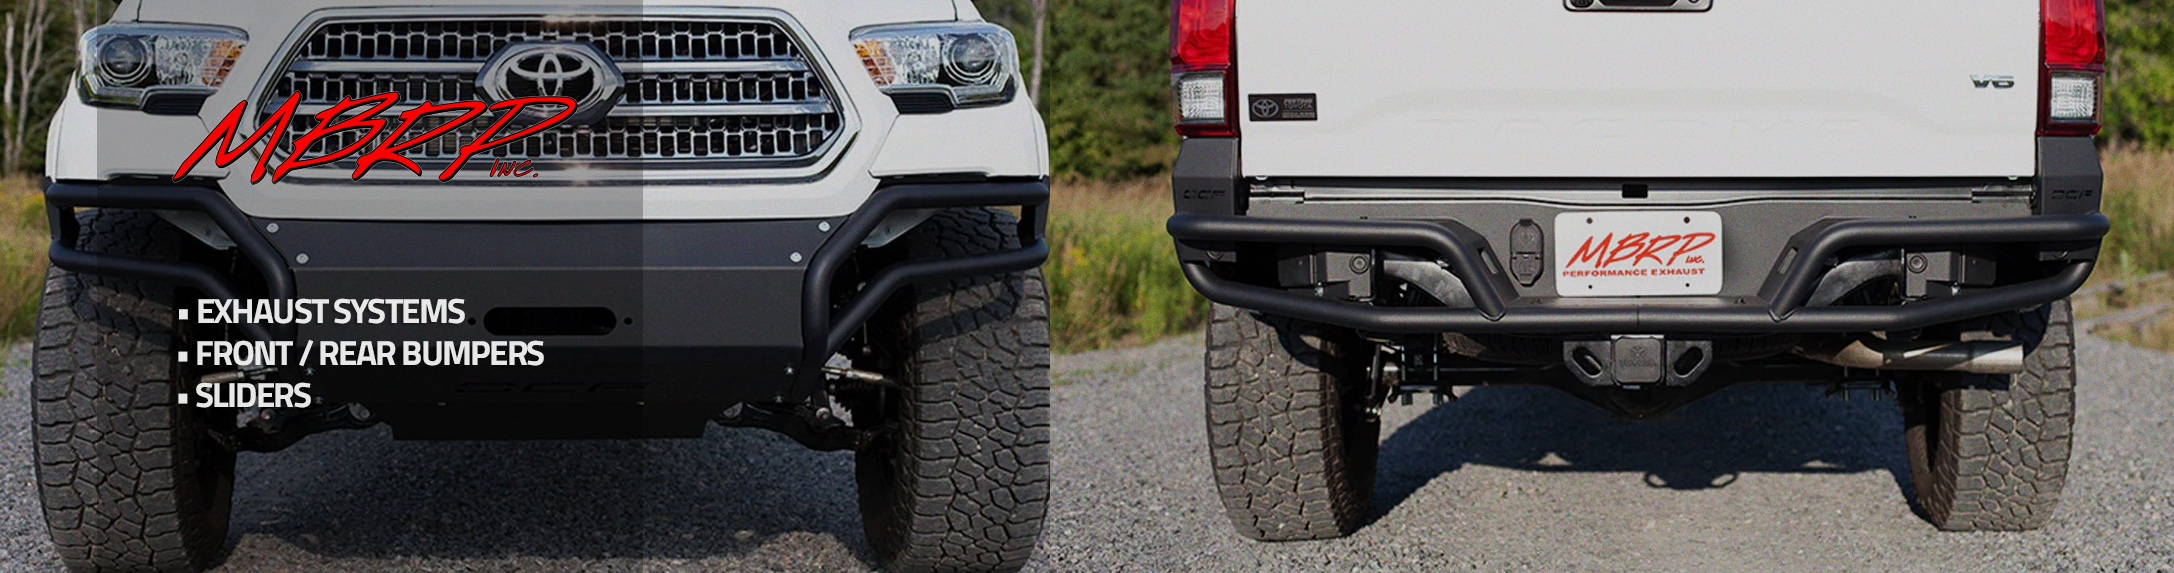 MBRP Toyota Tacoma Exhaust and Bumpers